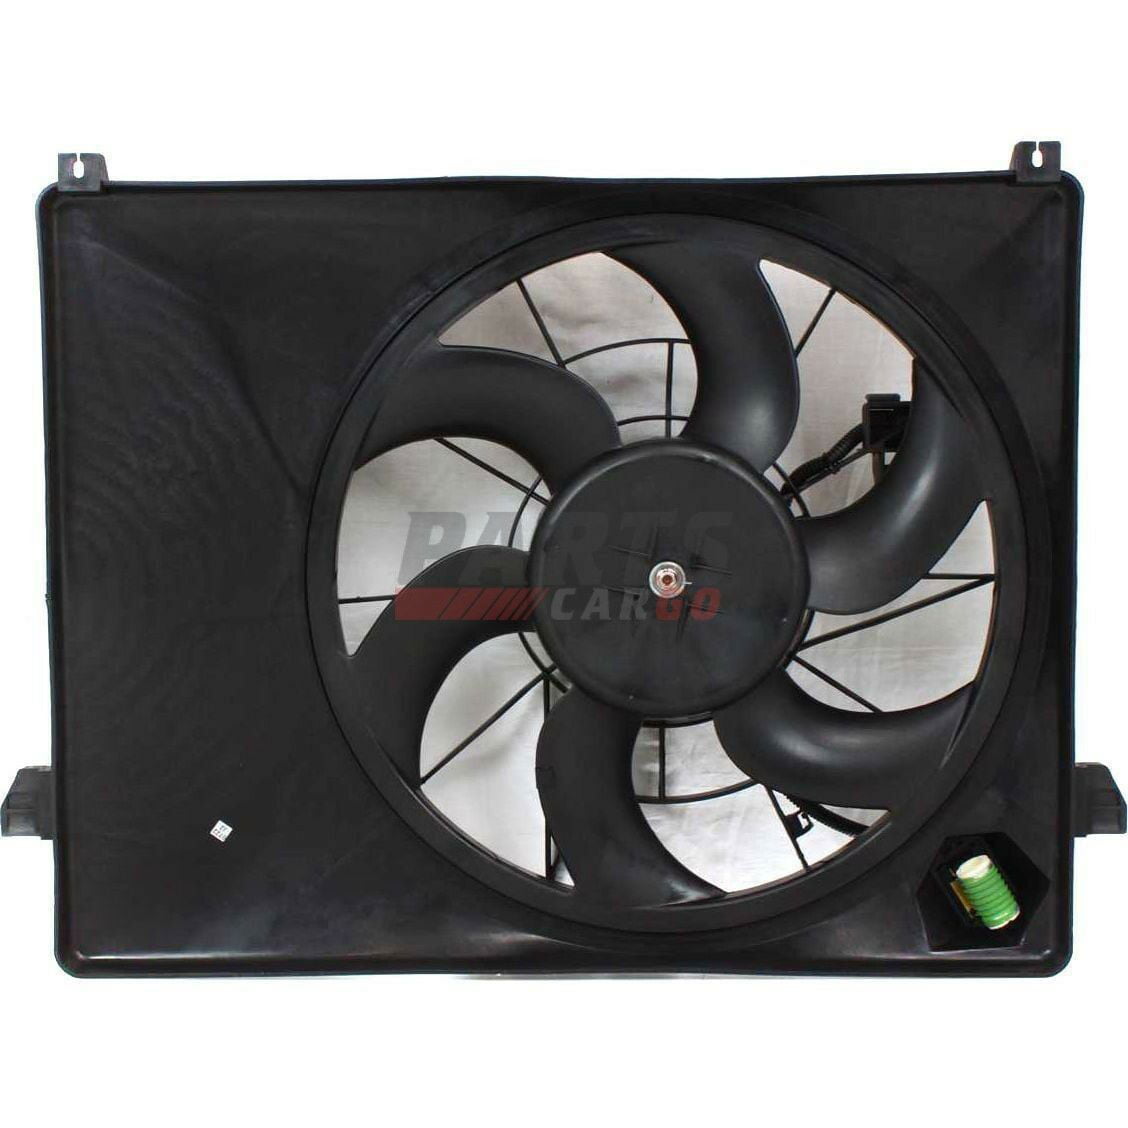 Kia 25380-1D300 Engine Cooling Fan Assembly 